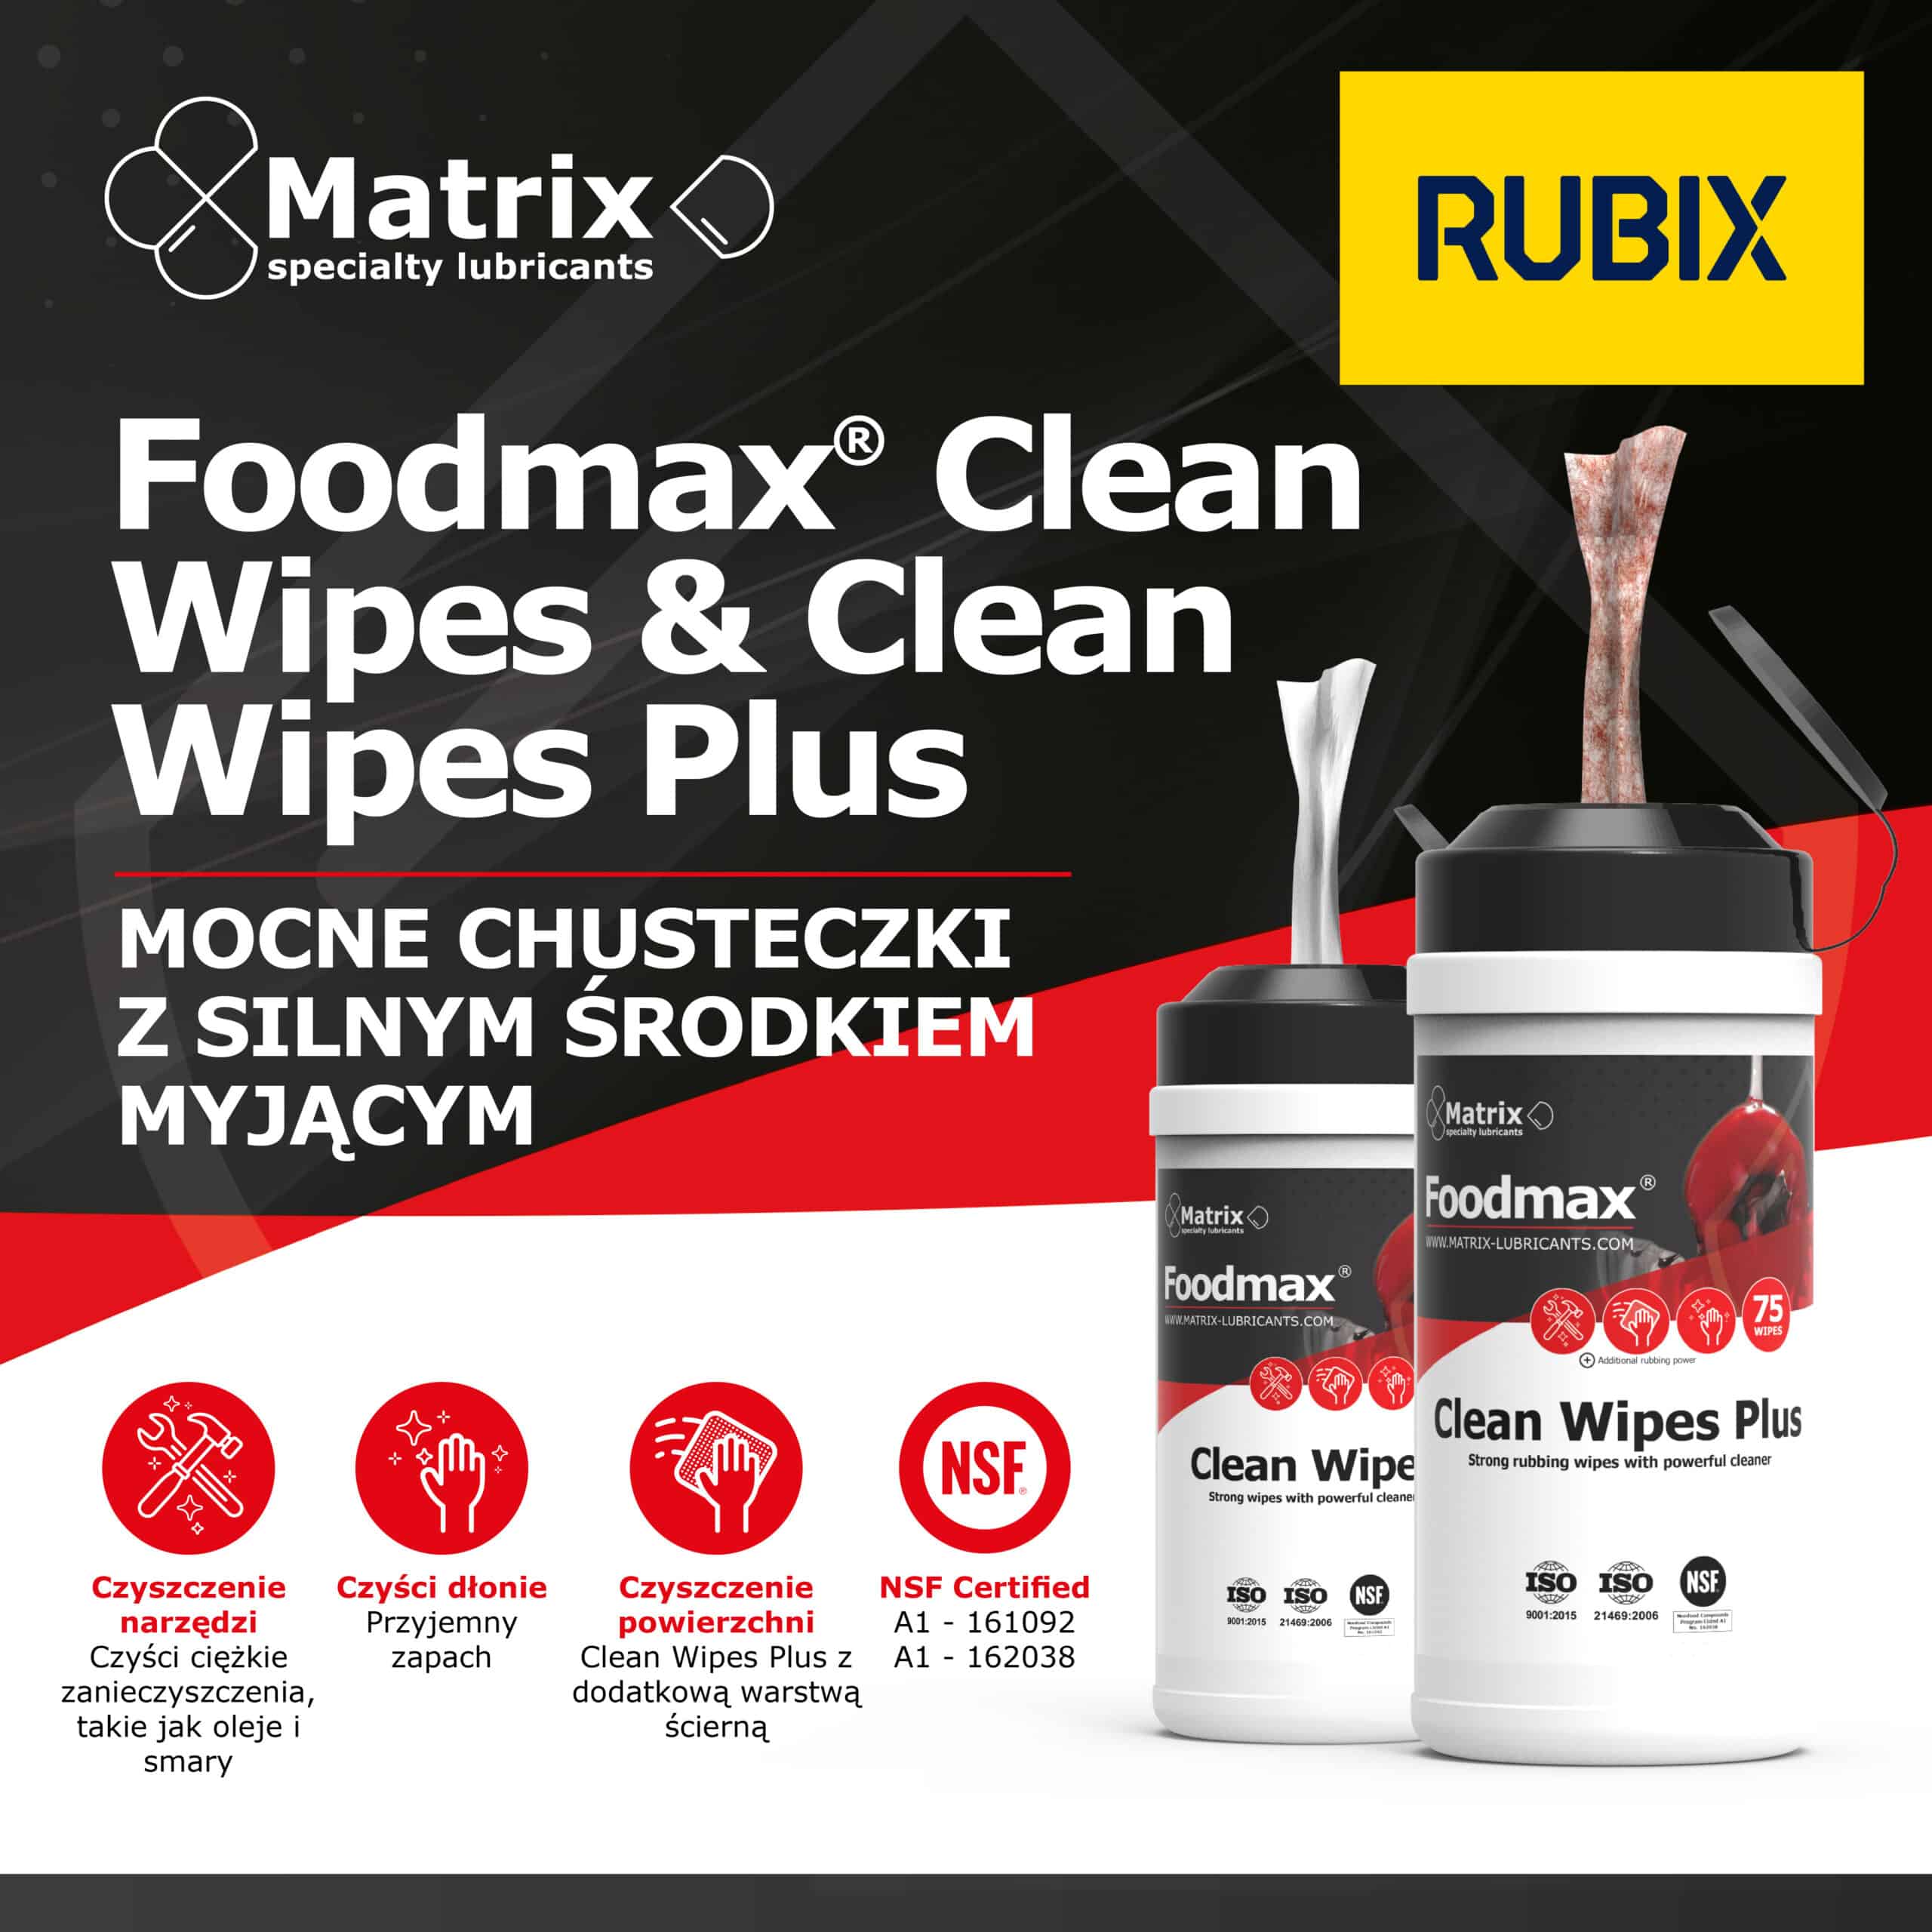 Matrix specialty lubricants Foodmax Clean Wipes and Clean Wipes Plus, collaboration with Rubix